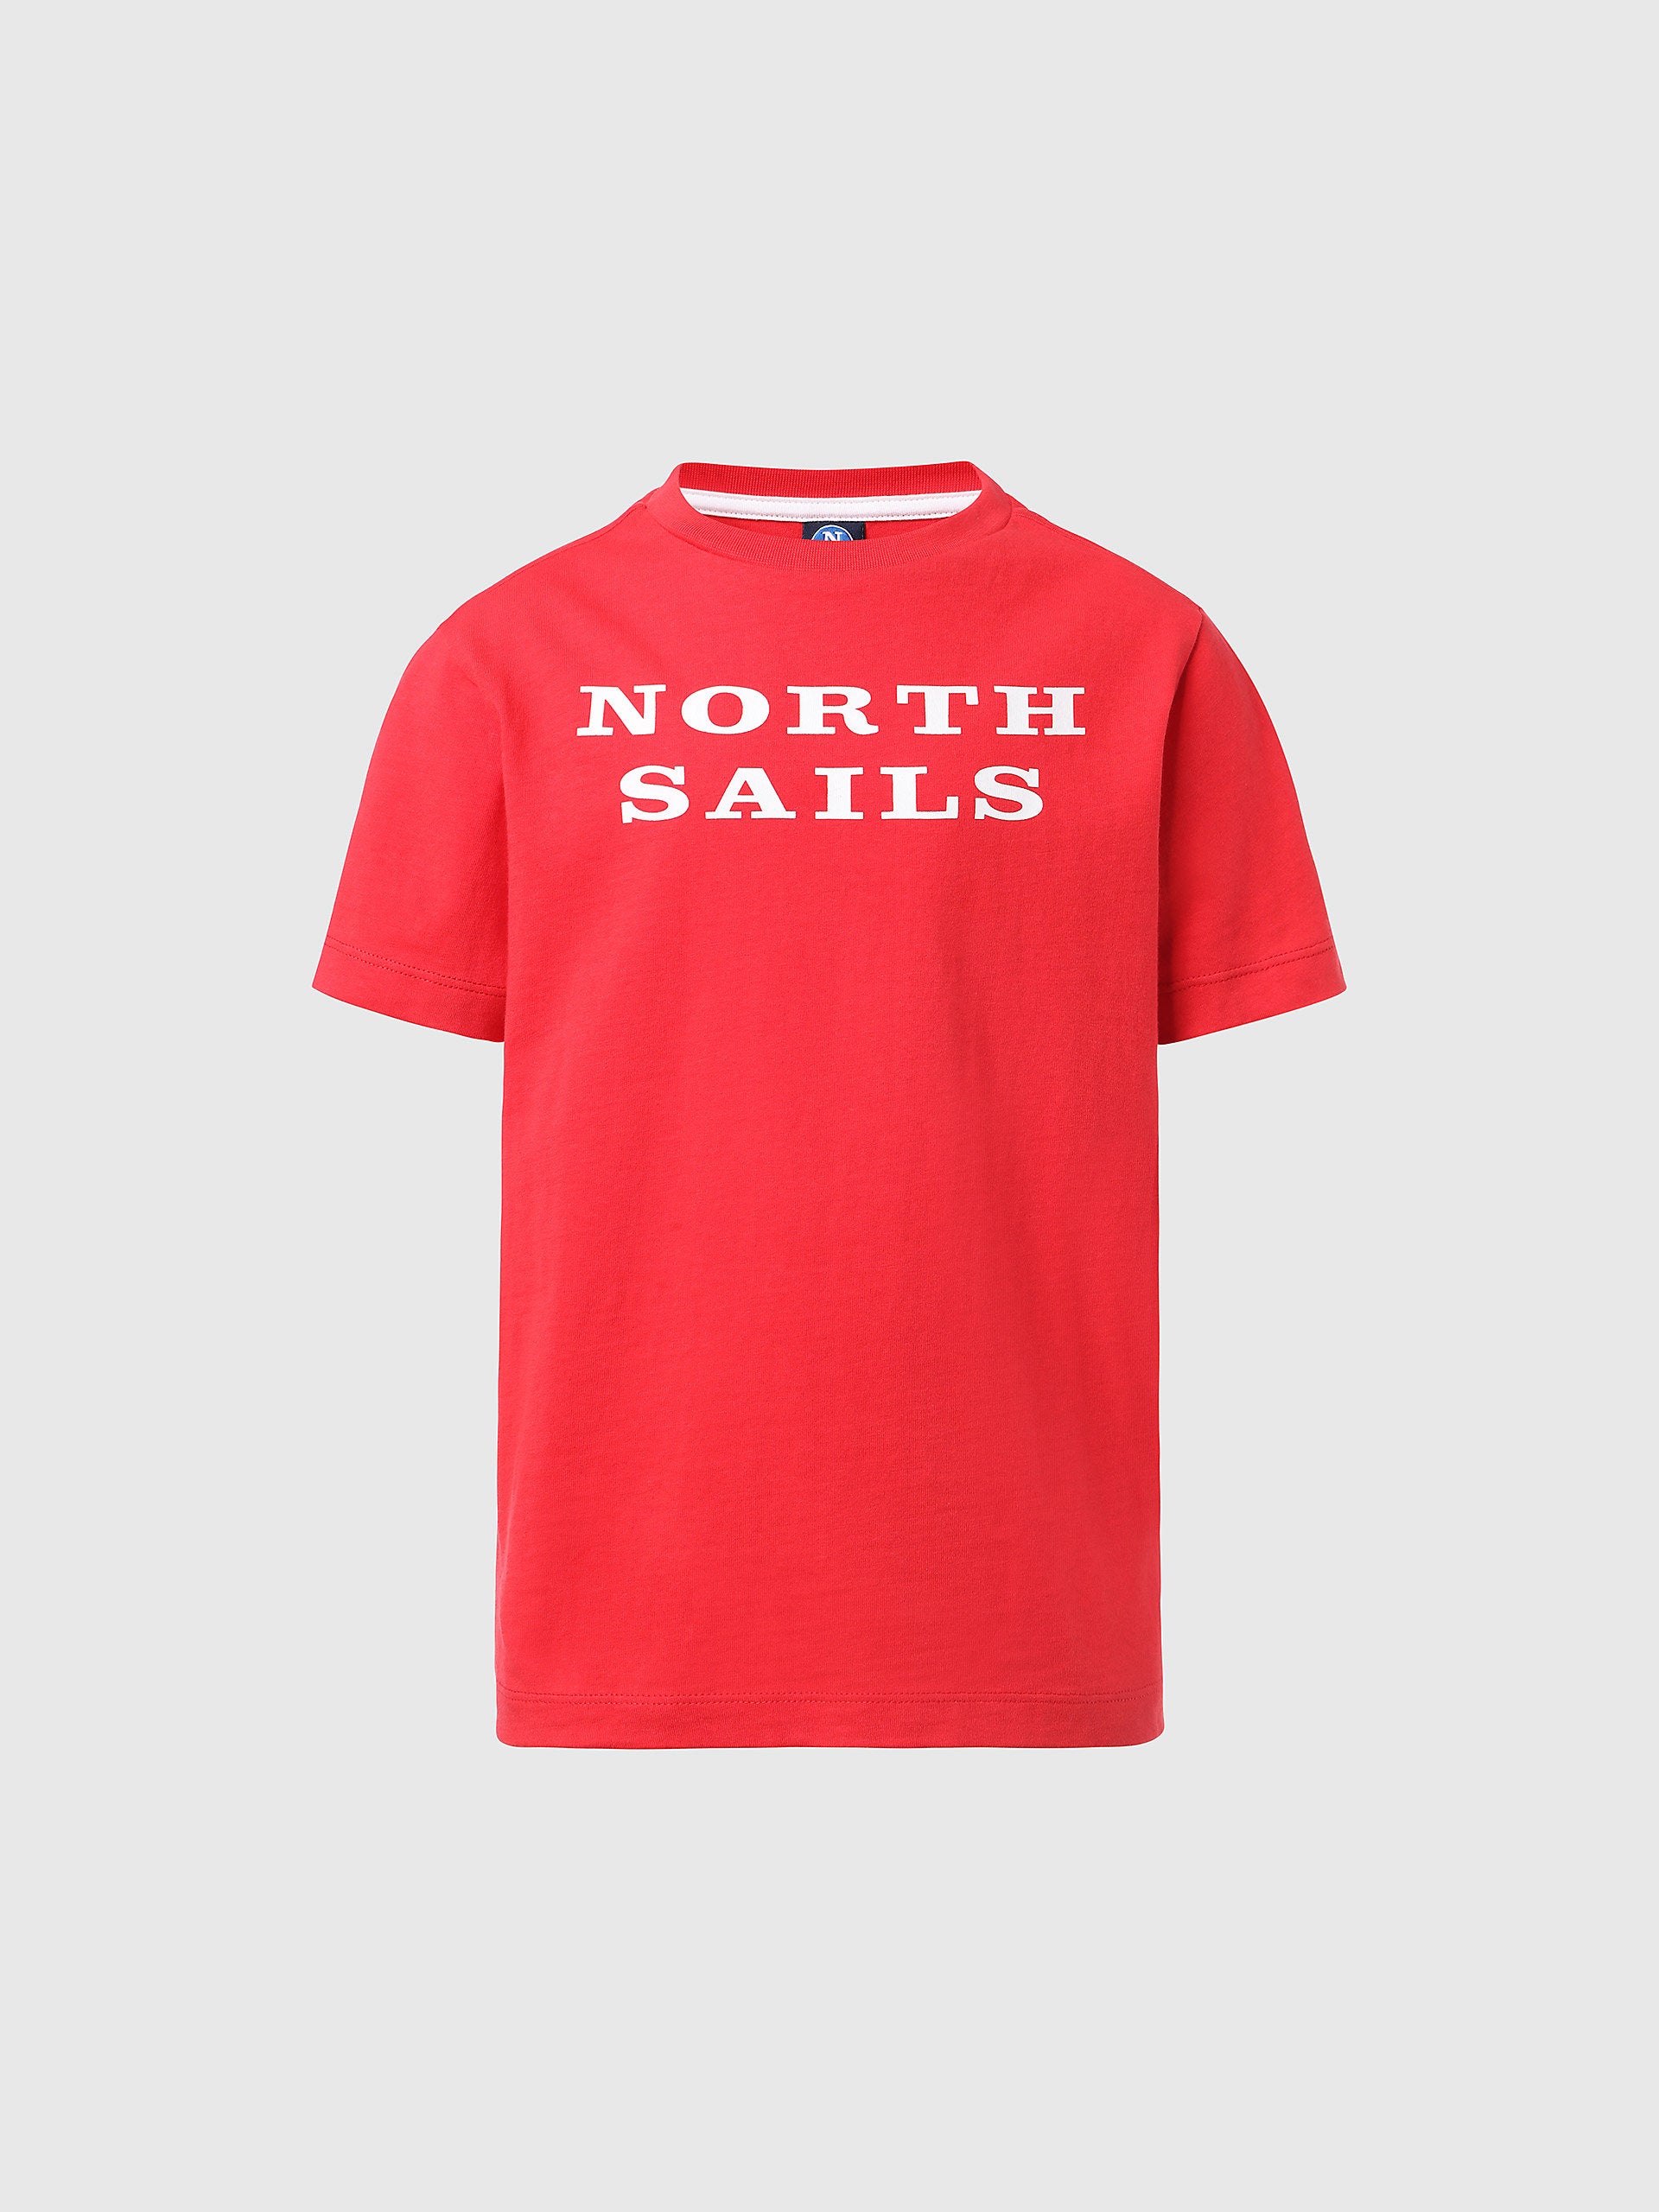 North Sails - T-shirt with chest printNorth SailsRed4